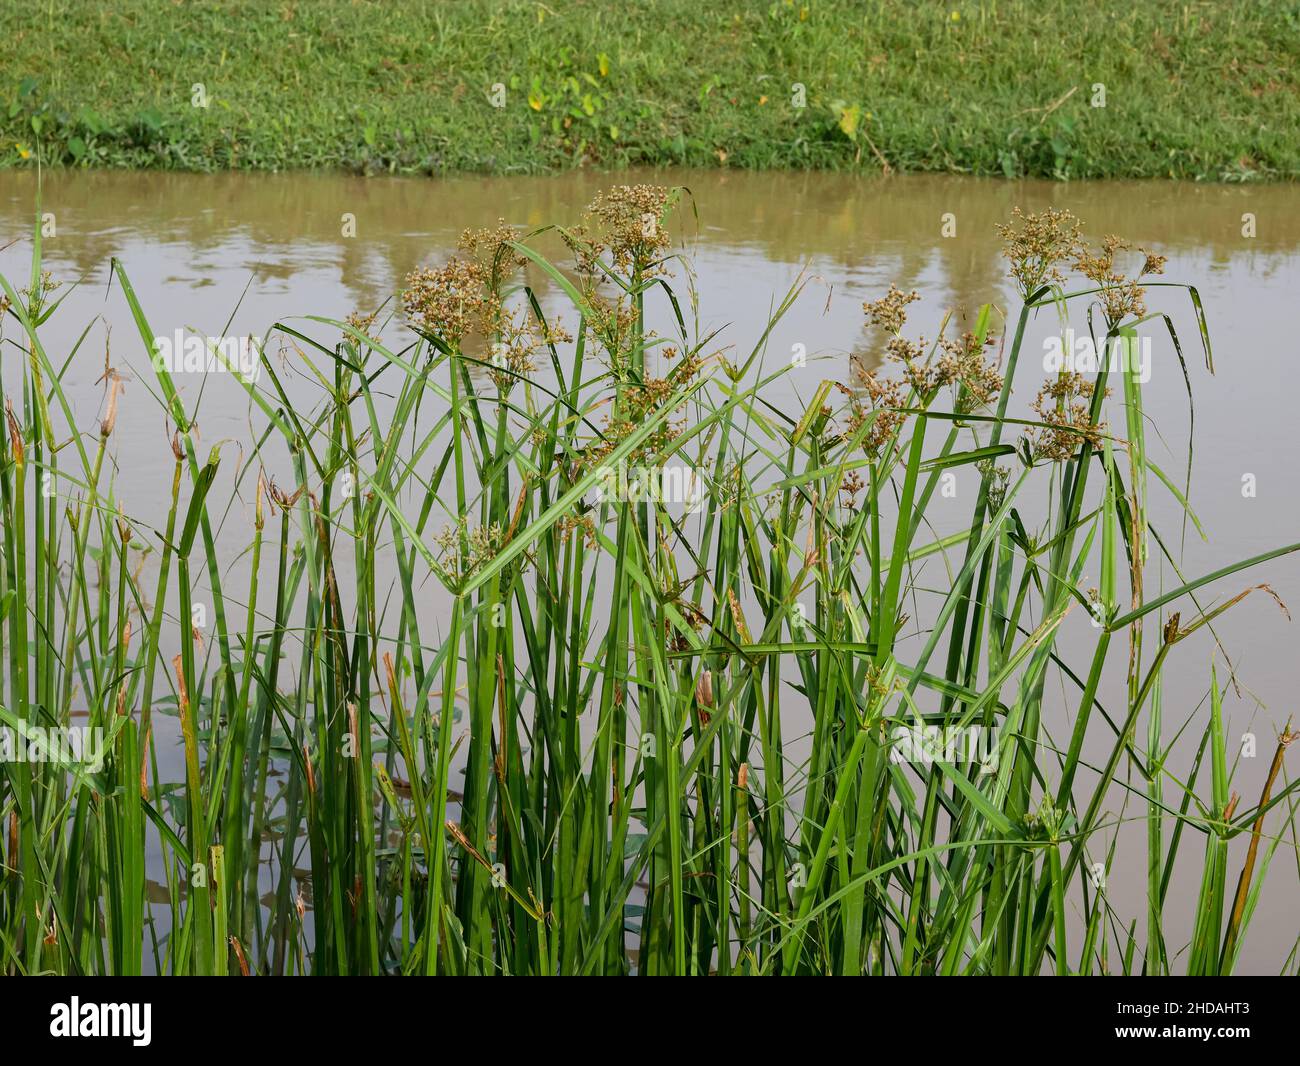 Club-rush or Scirpus group of the Cyperáceae family by the river. Stock Photo